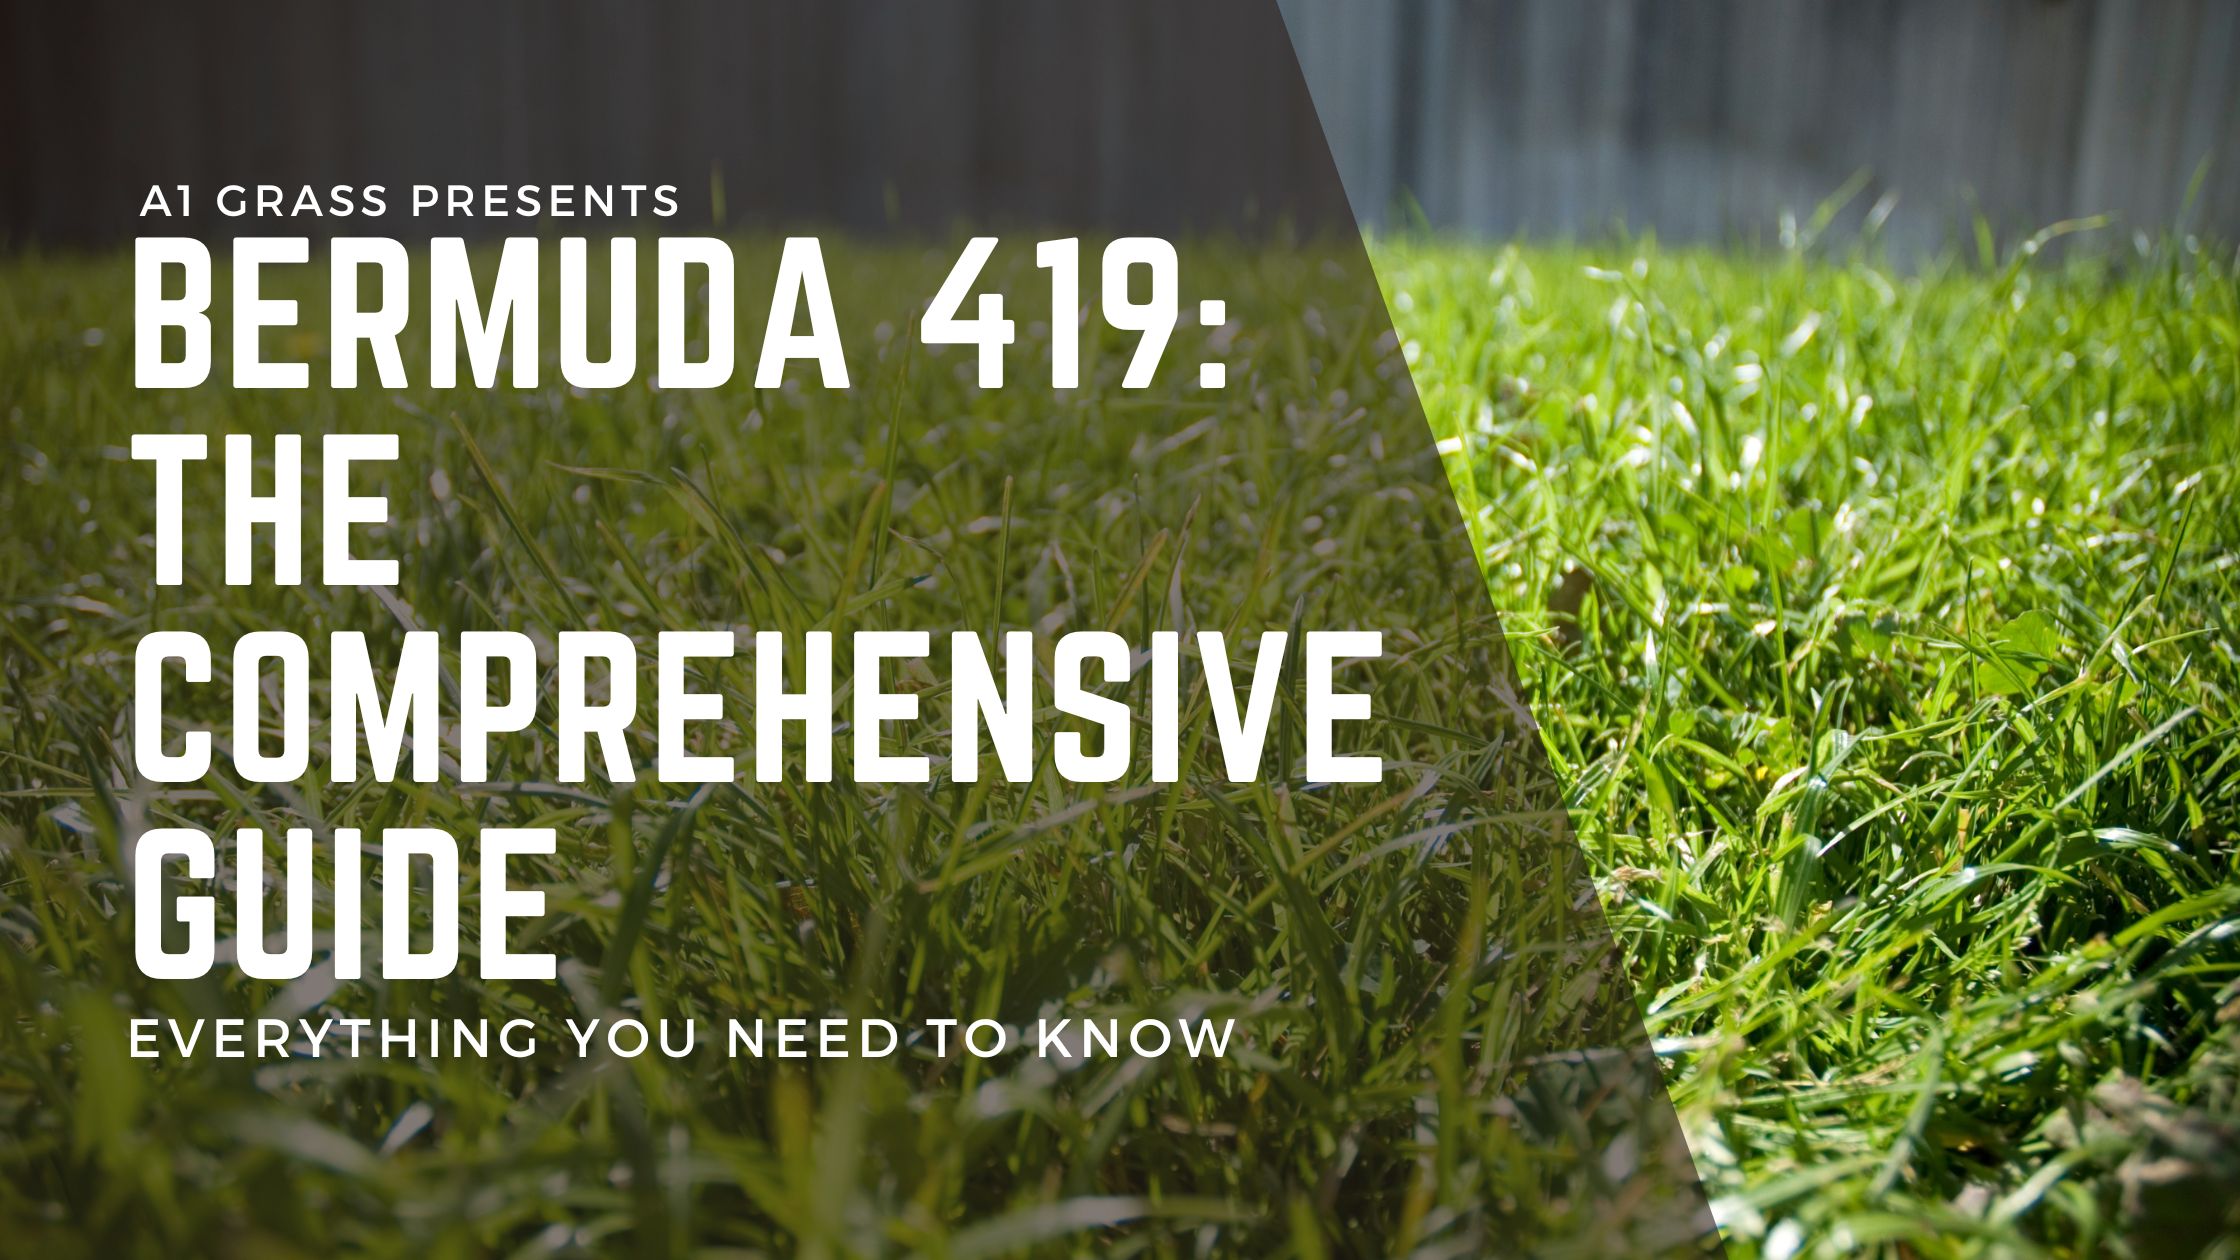 Bermuda 419 Grass - Everything you need to know